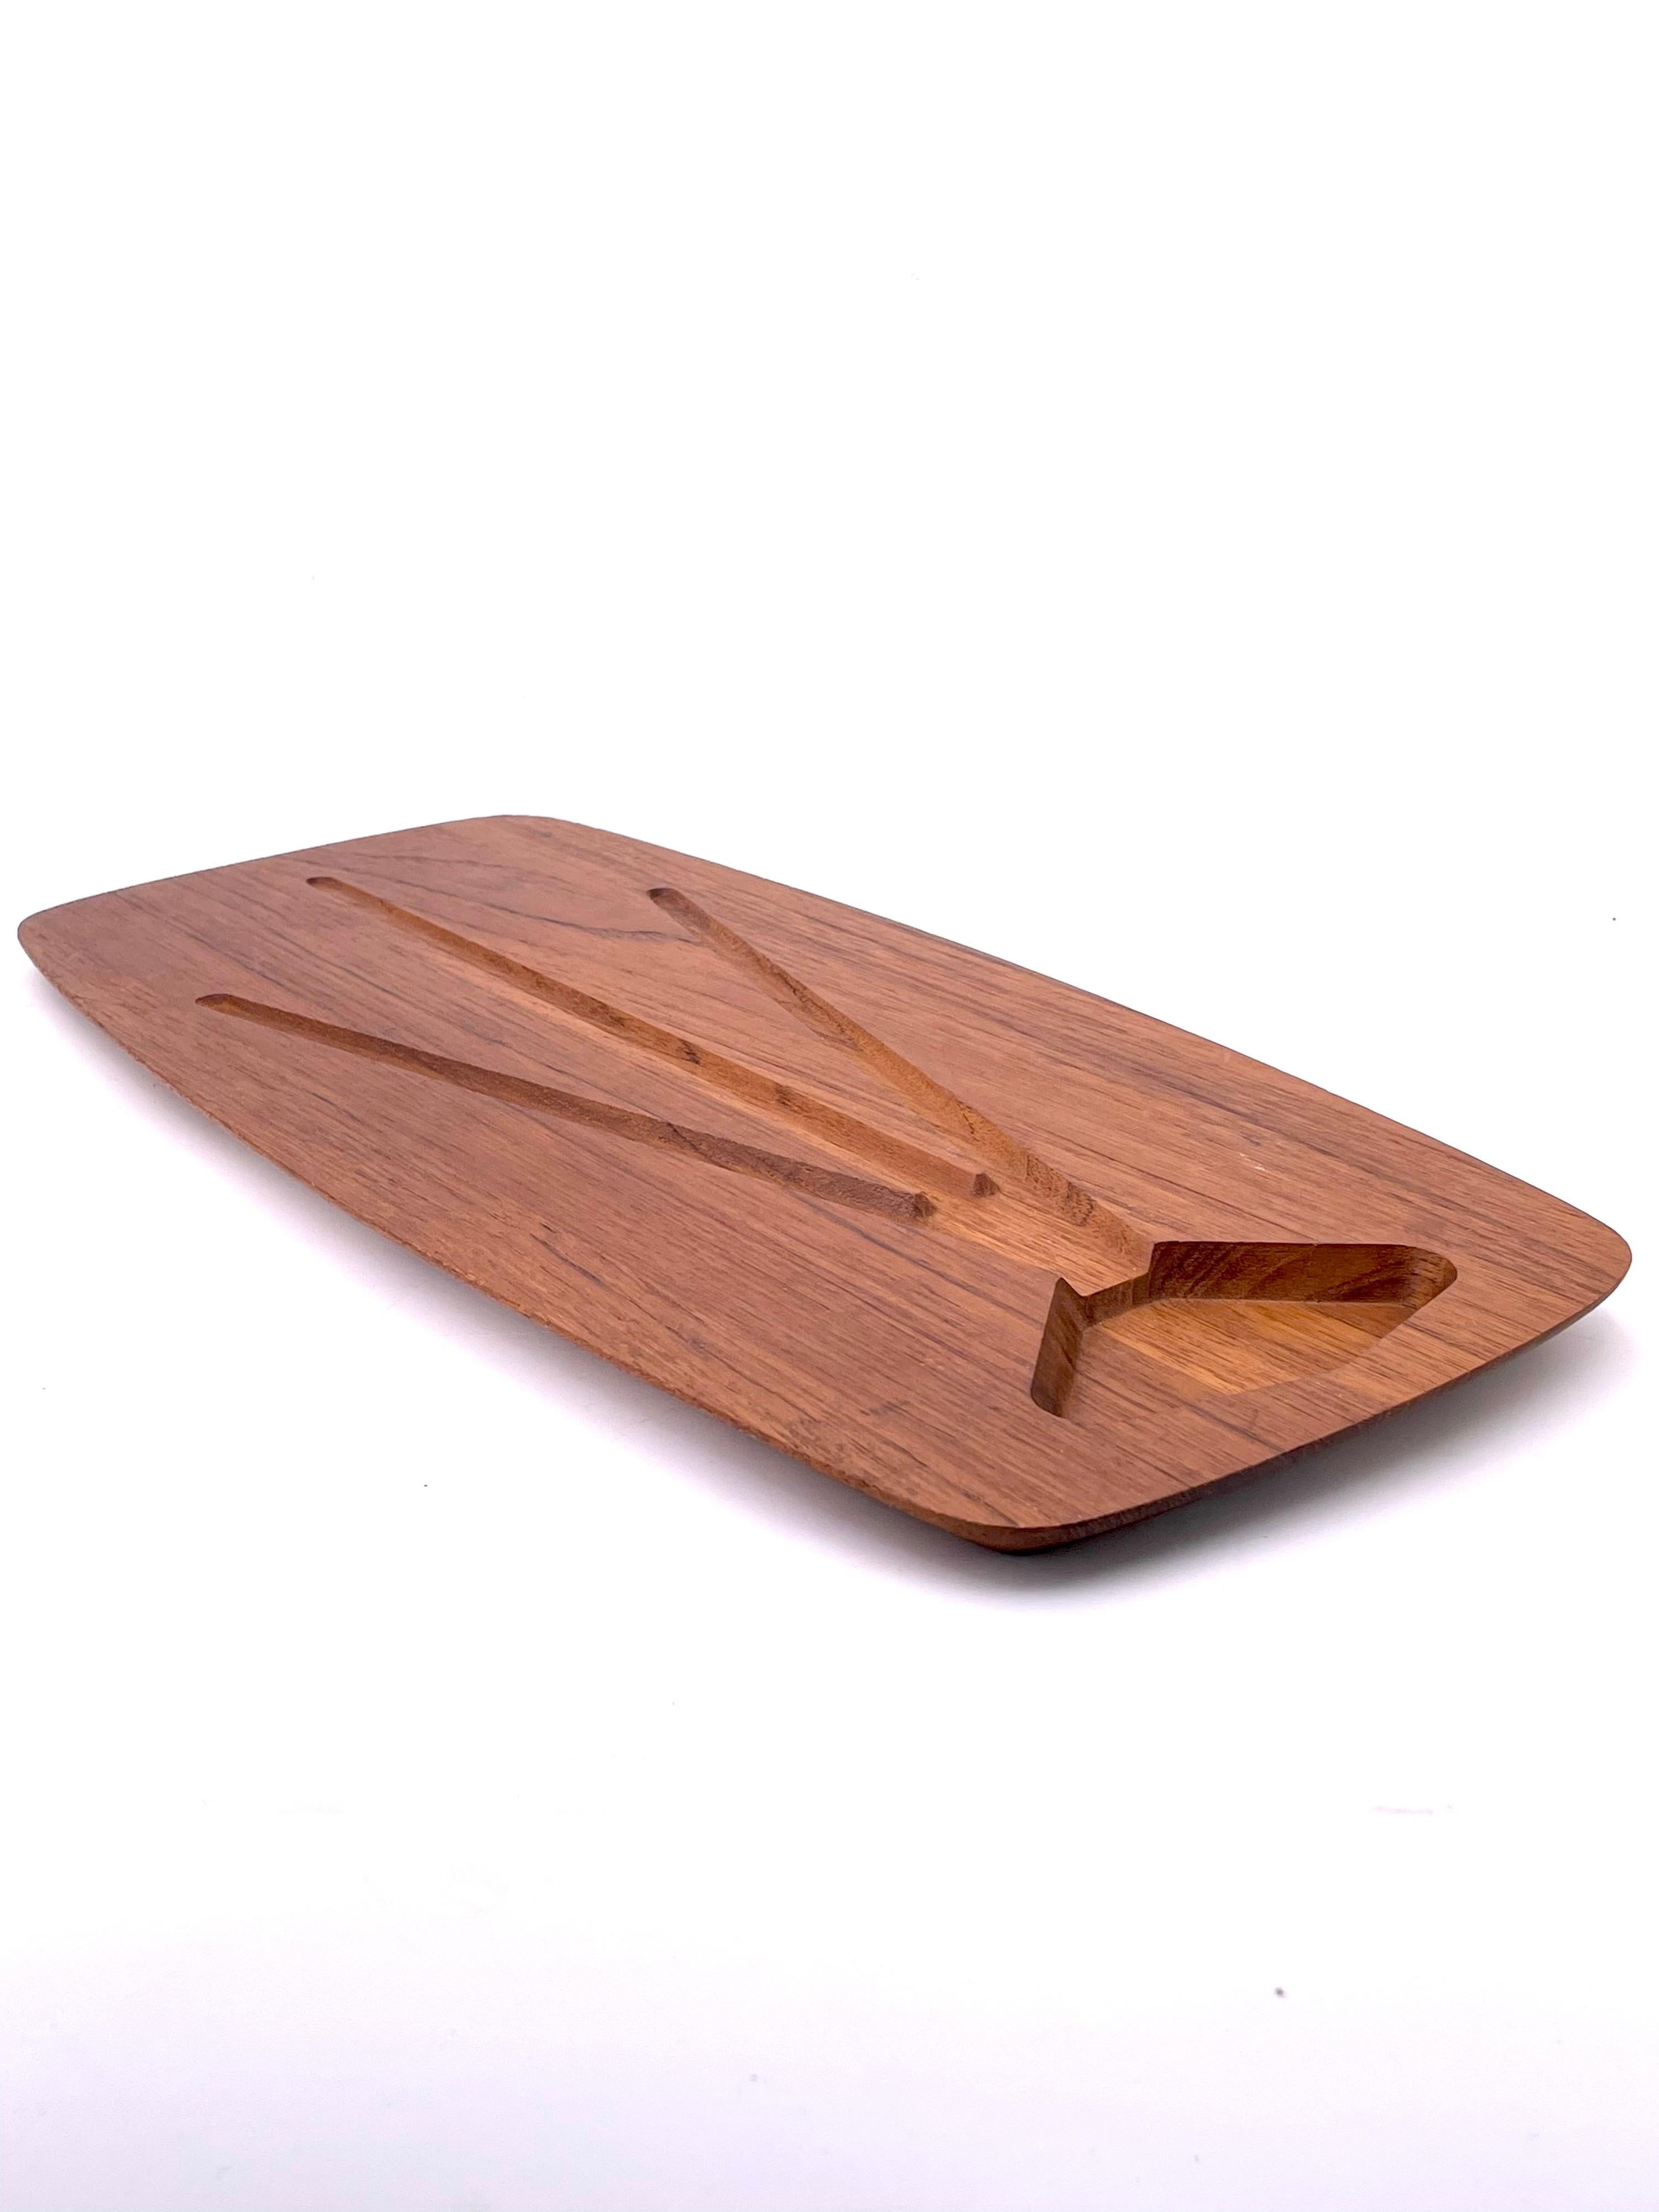 Beautiful solid teak surfboard style carving cutting board, for putting meats and drain the juices. nice beveled edge made in Denmark, circa 1970's by DKF stamped in the back great design and quality.